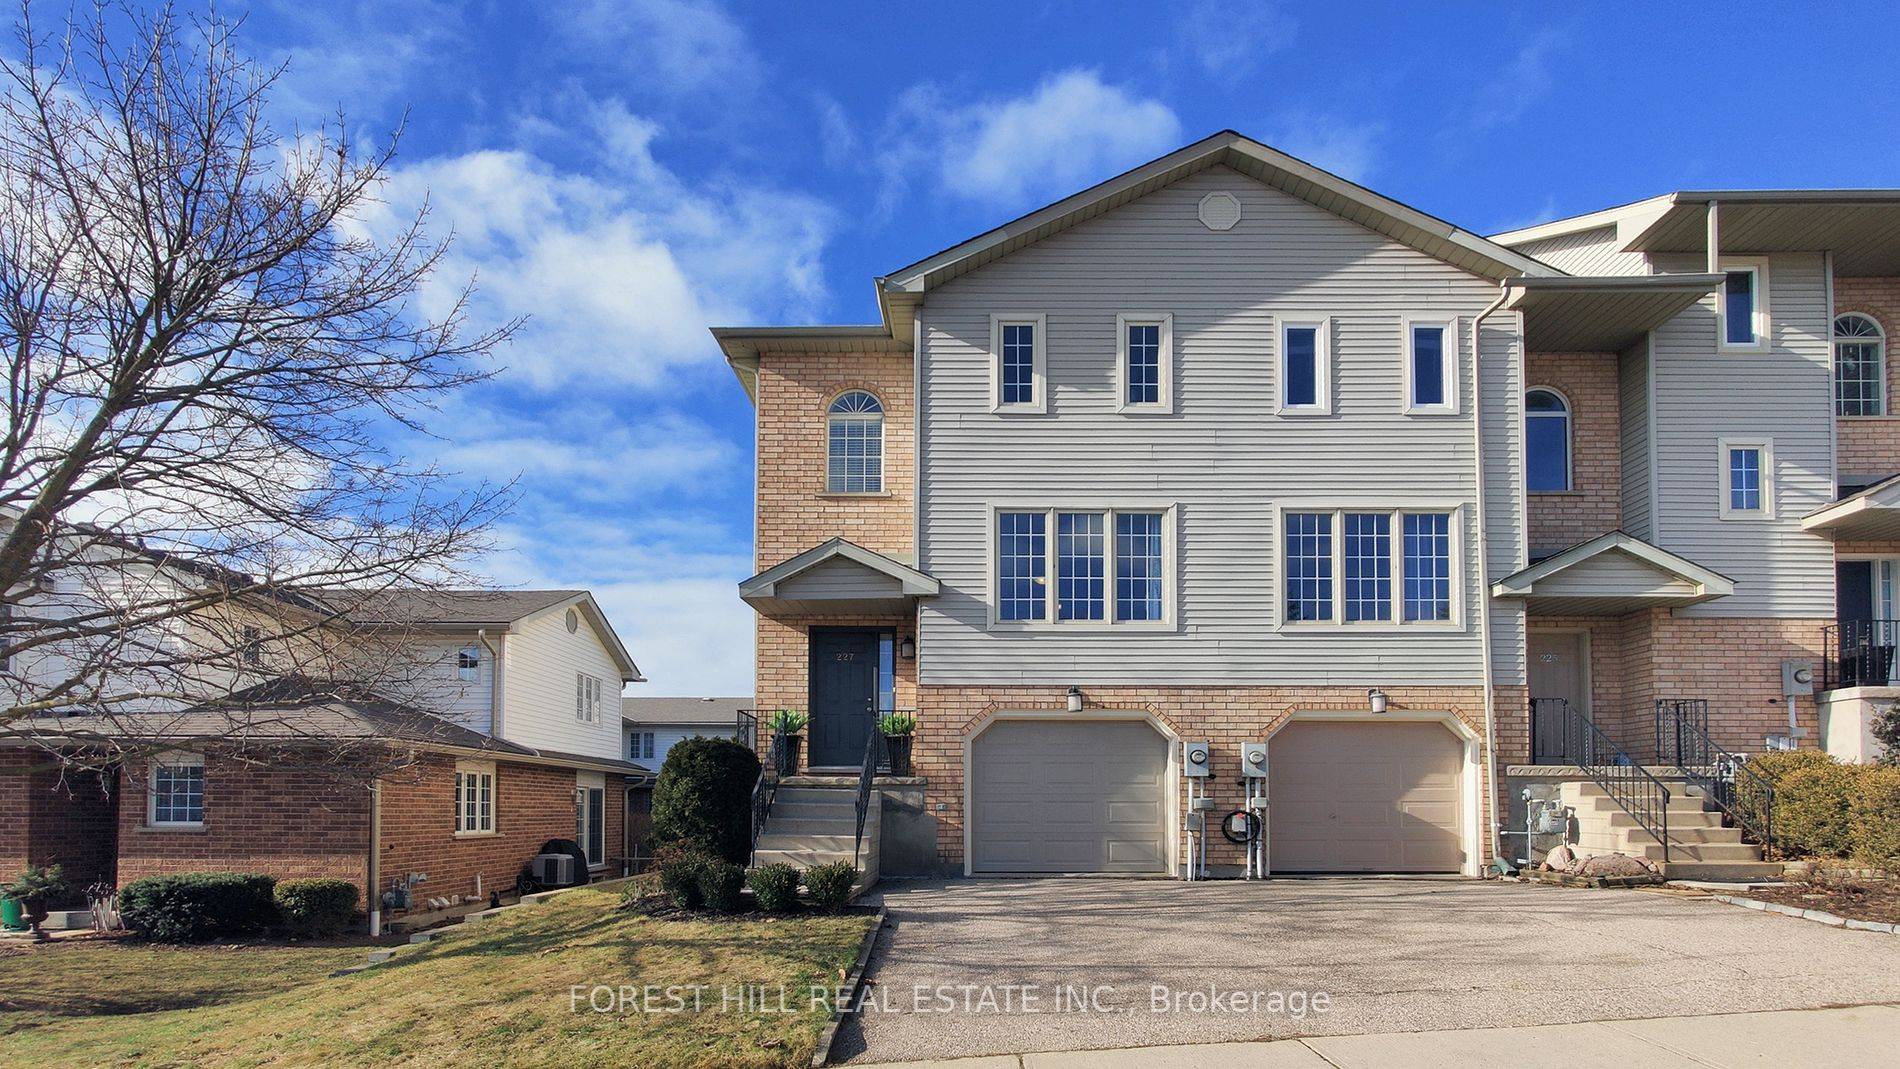 Welcome to this charming end unit townhome nestled on a premium oversized lot !